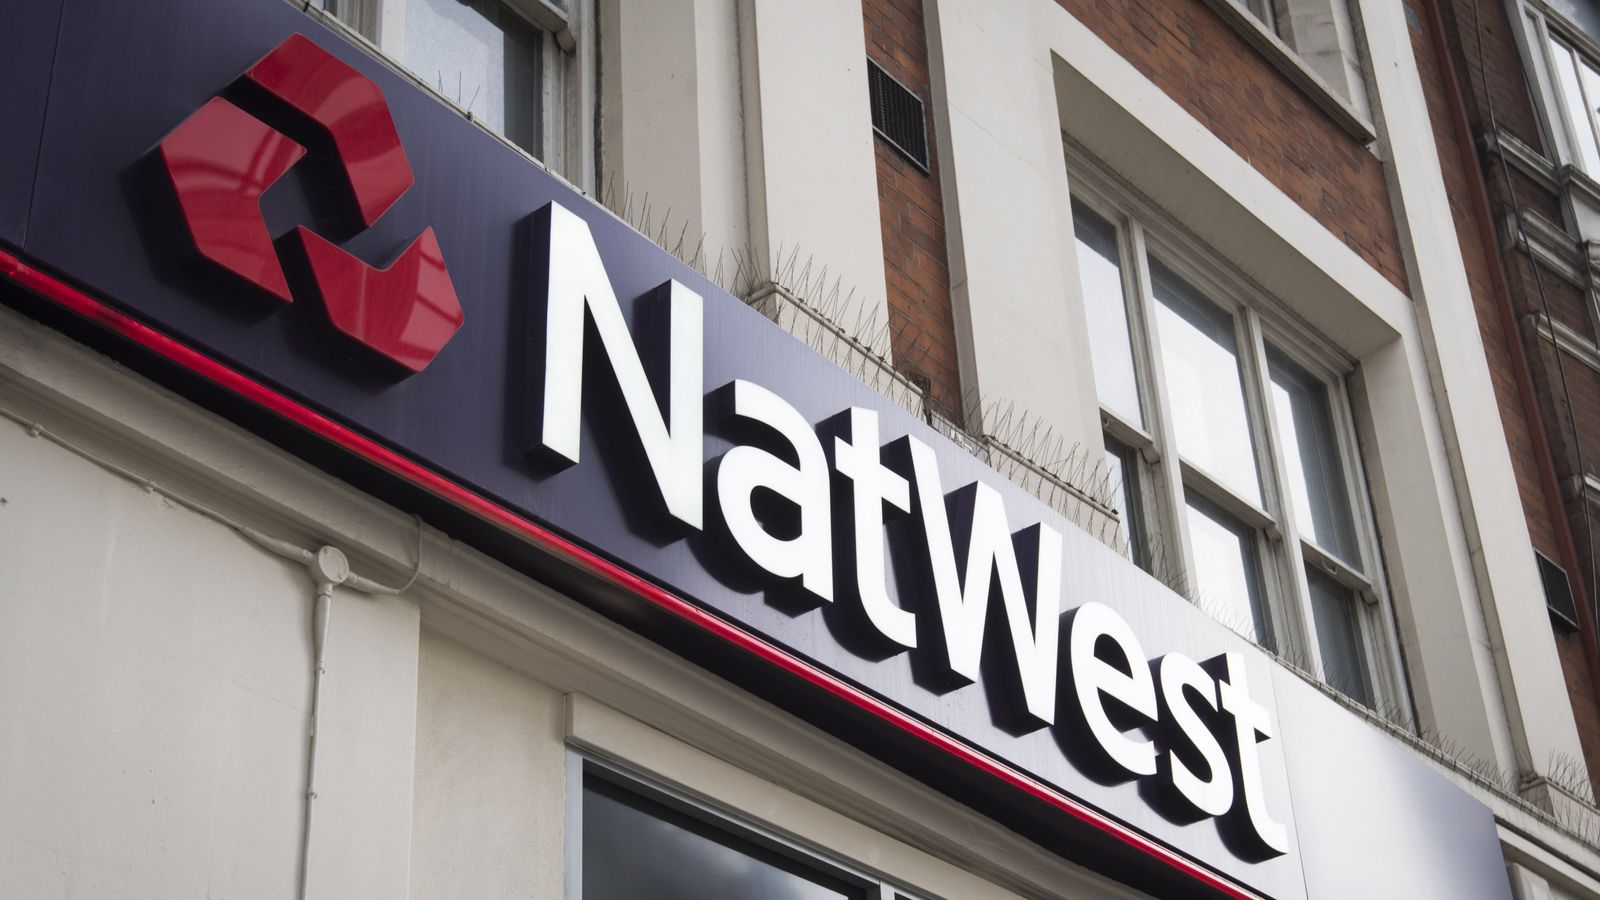 Bankers bonuses: NatWest reveals profits to £5.1bn last year and chief executive payment